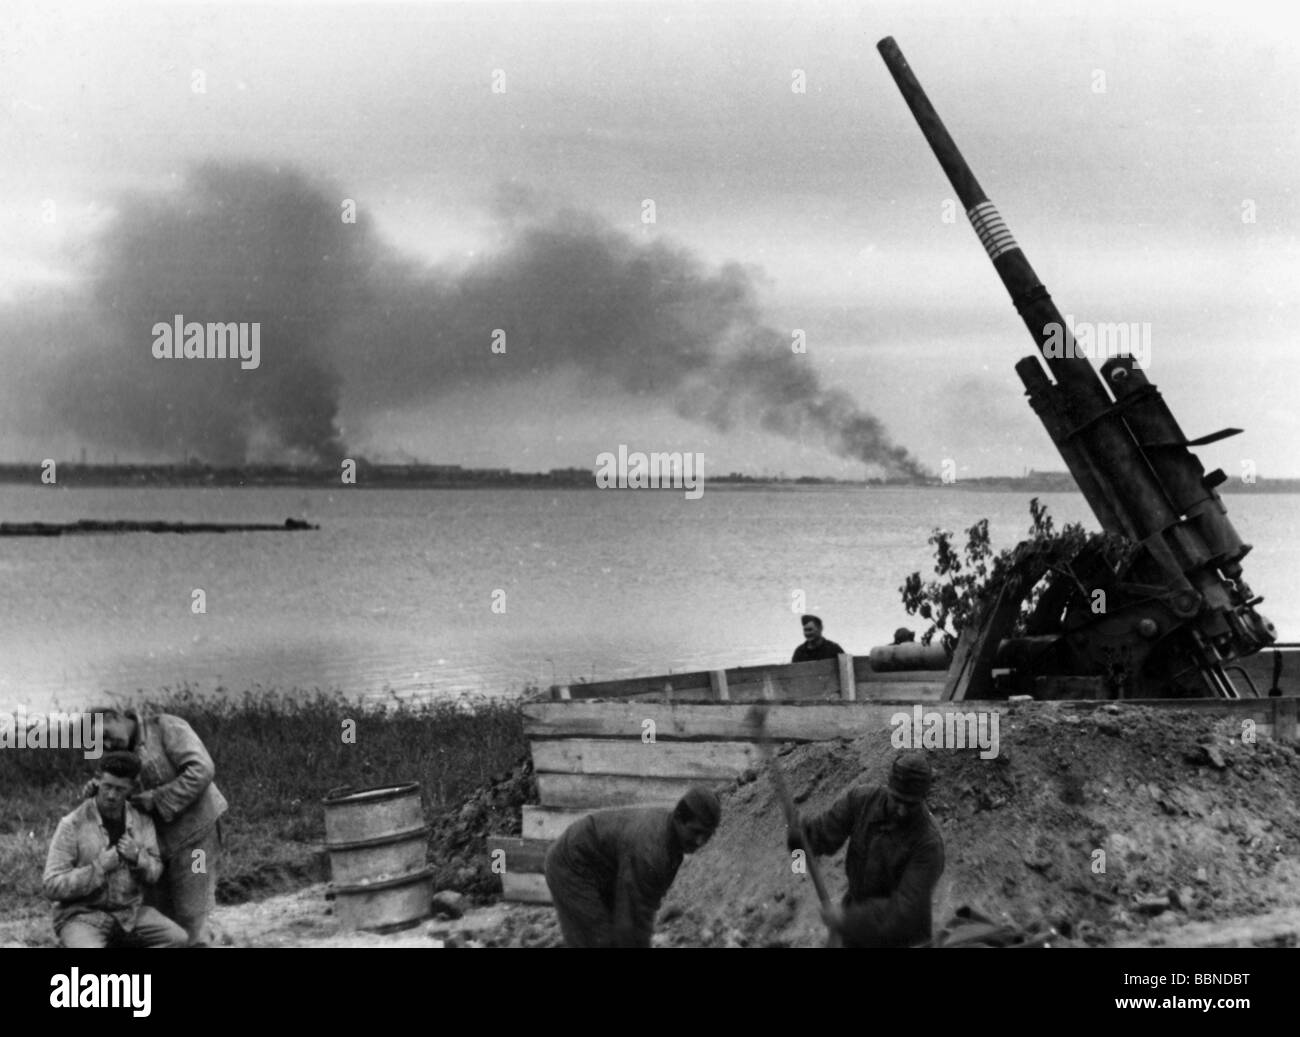 events, Second World War / WWII, aerial warfare, antiaircraft, German anti-aircraft gun emplacement near Kandalaksha, circa 1943, 20th century, historic, historical, Kola Peninsula, 88 mm Flak 18, AA guns, soldiers, soldier, cutting hair, hairdressing, completing position, Continuation War 1941 - 1944, Finland, Russia, Germany, fires, clouds of smoke, Eastern Front, 8.8 cm, people, 1940s, Stock Photo